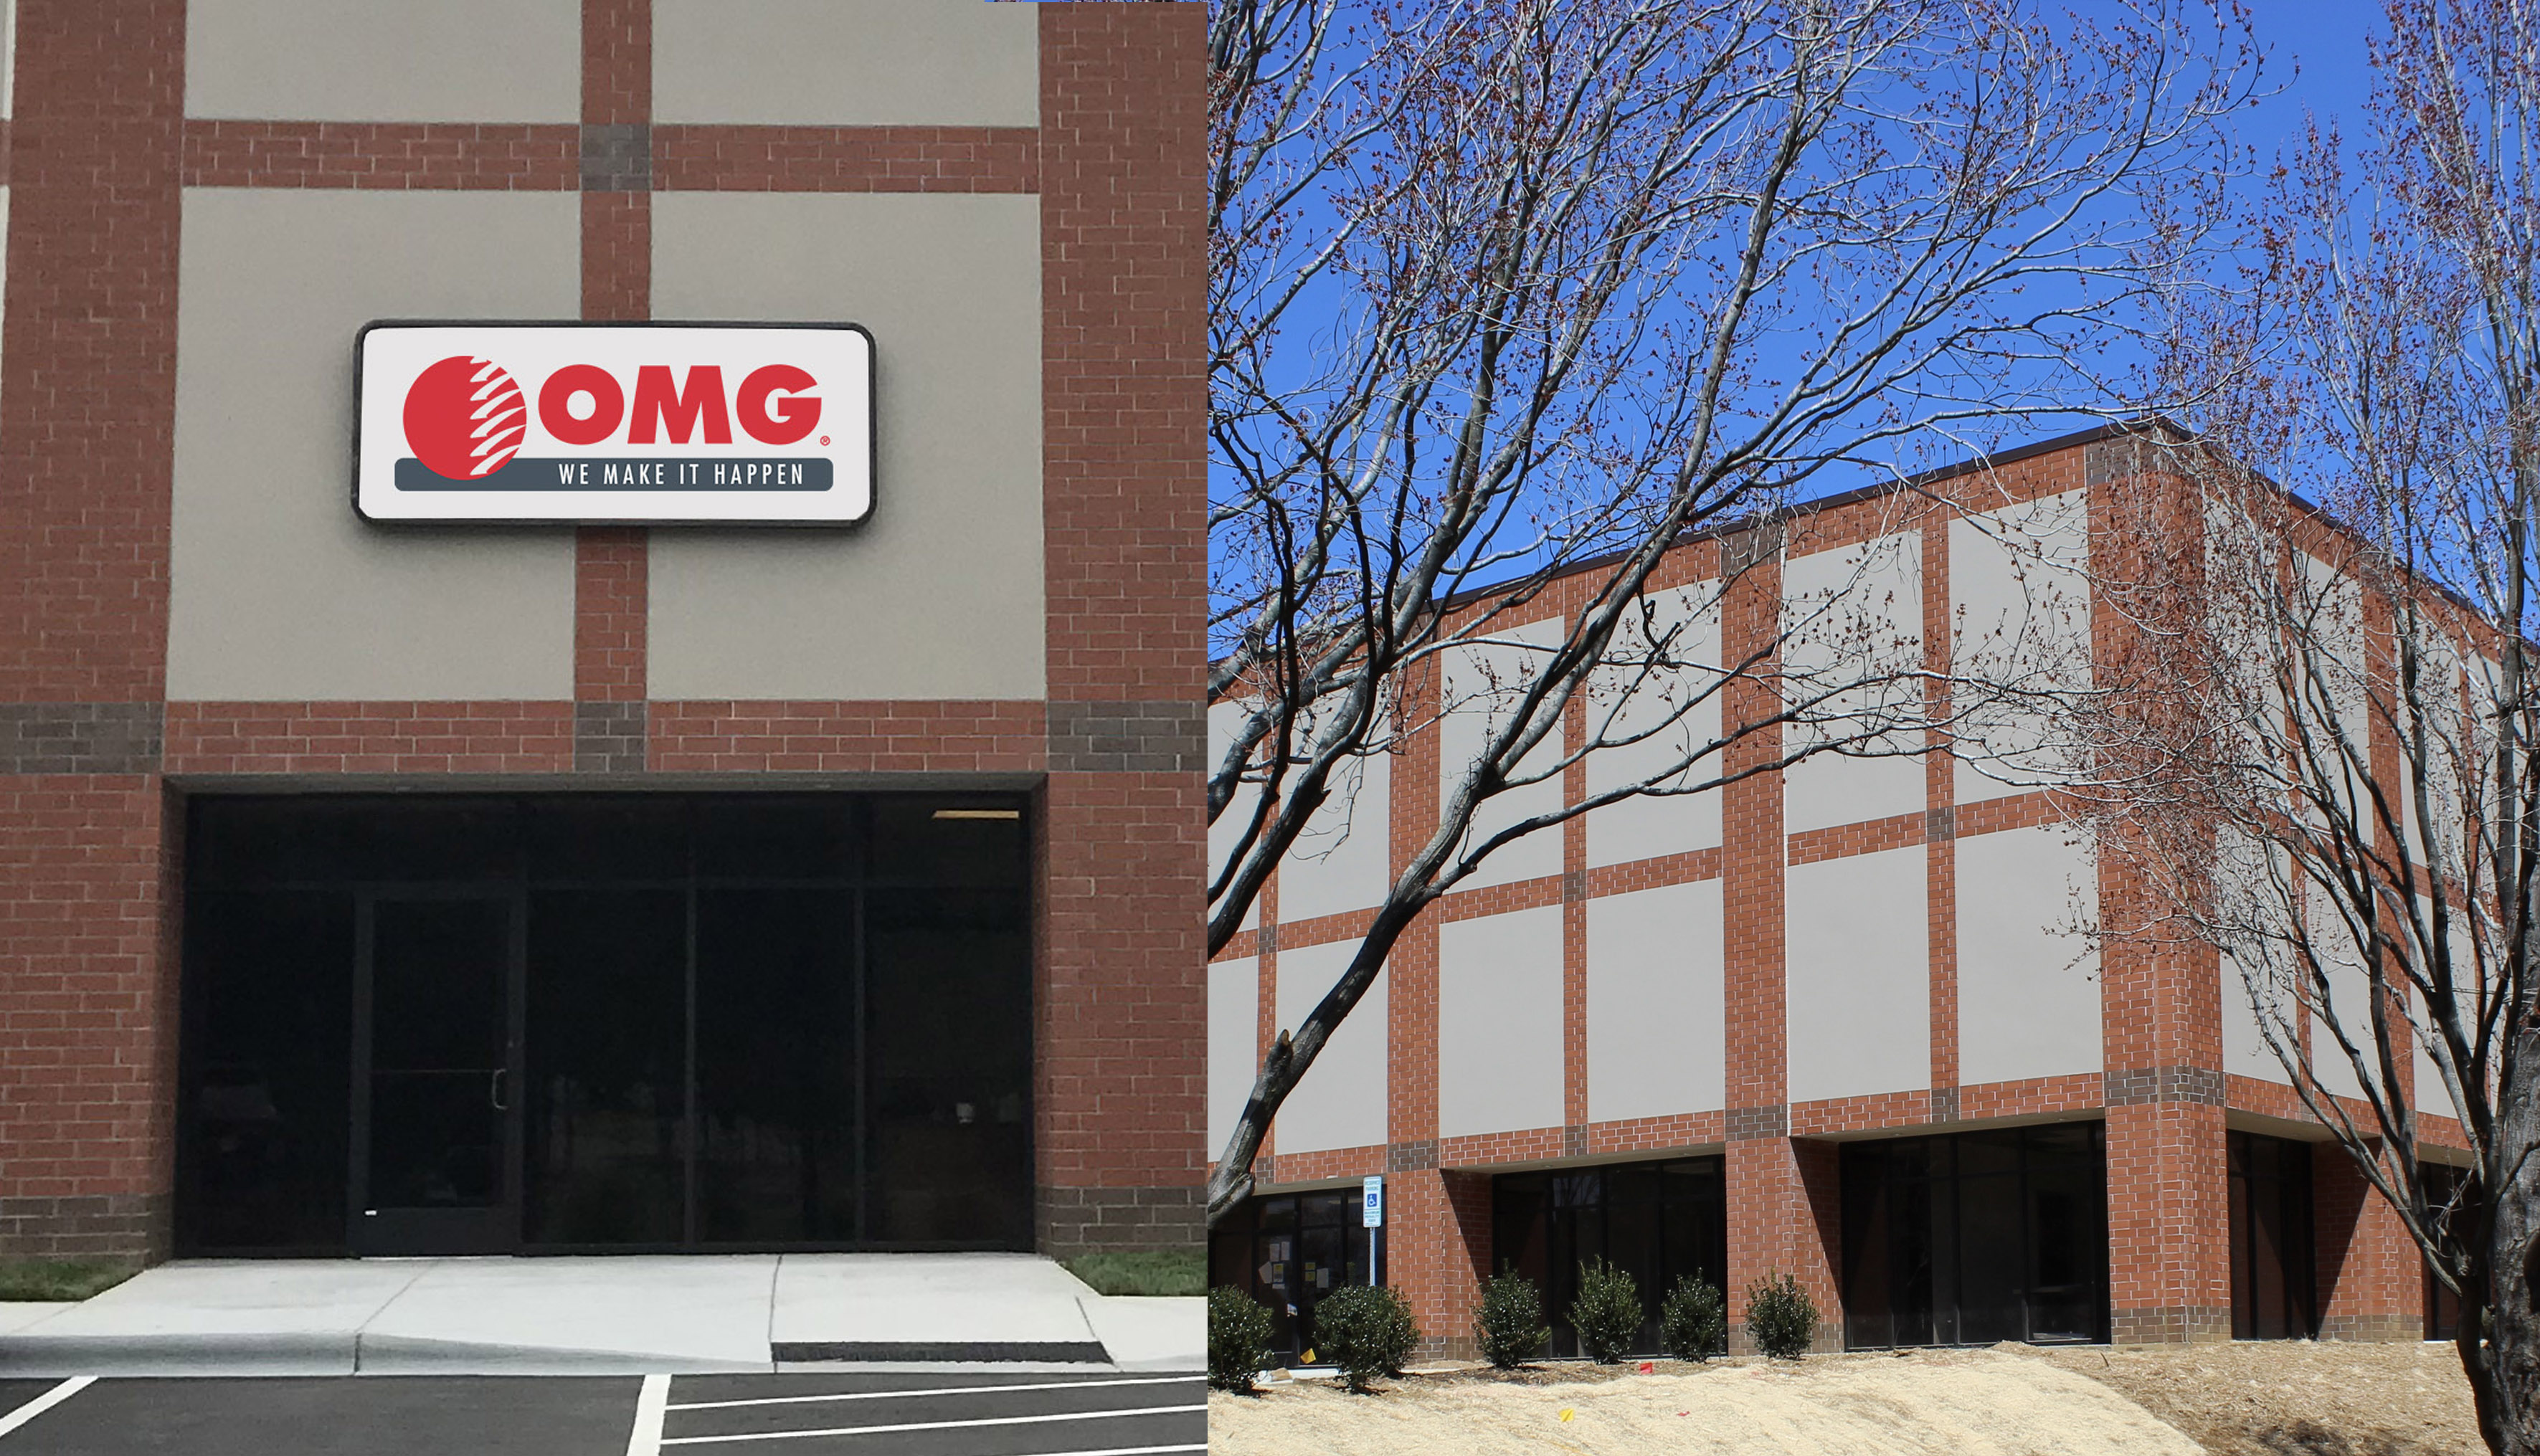 JUL - ProdSvc - OMG -OMG Roofing Products Opens a New Larger Warehouse in Charlotte